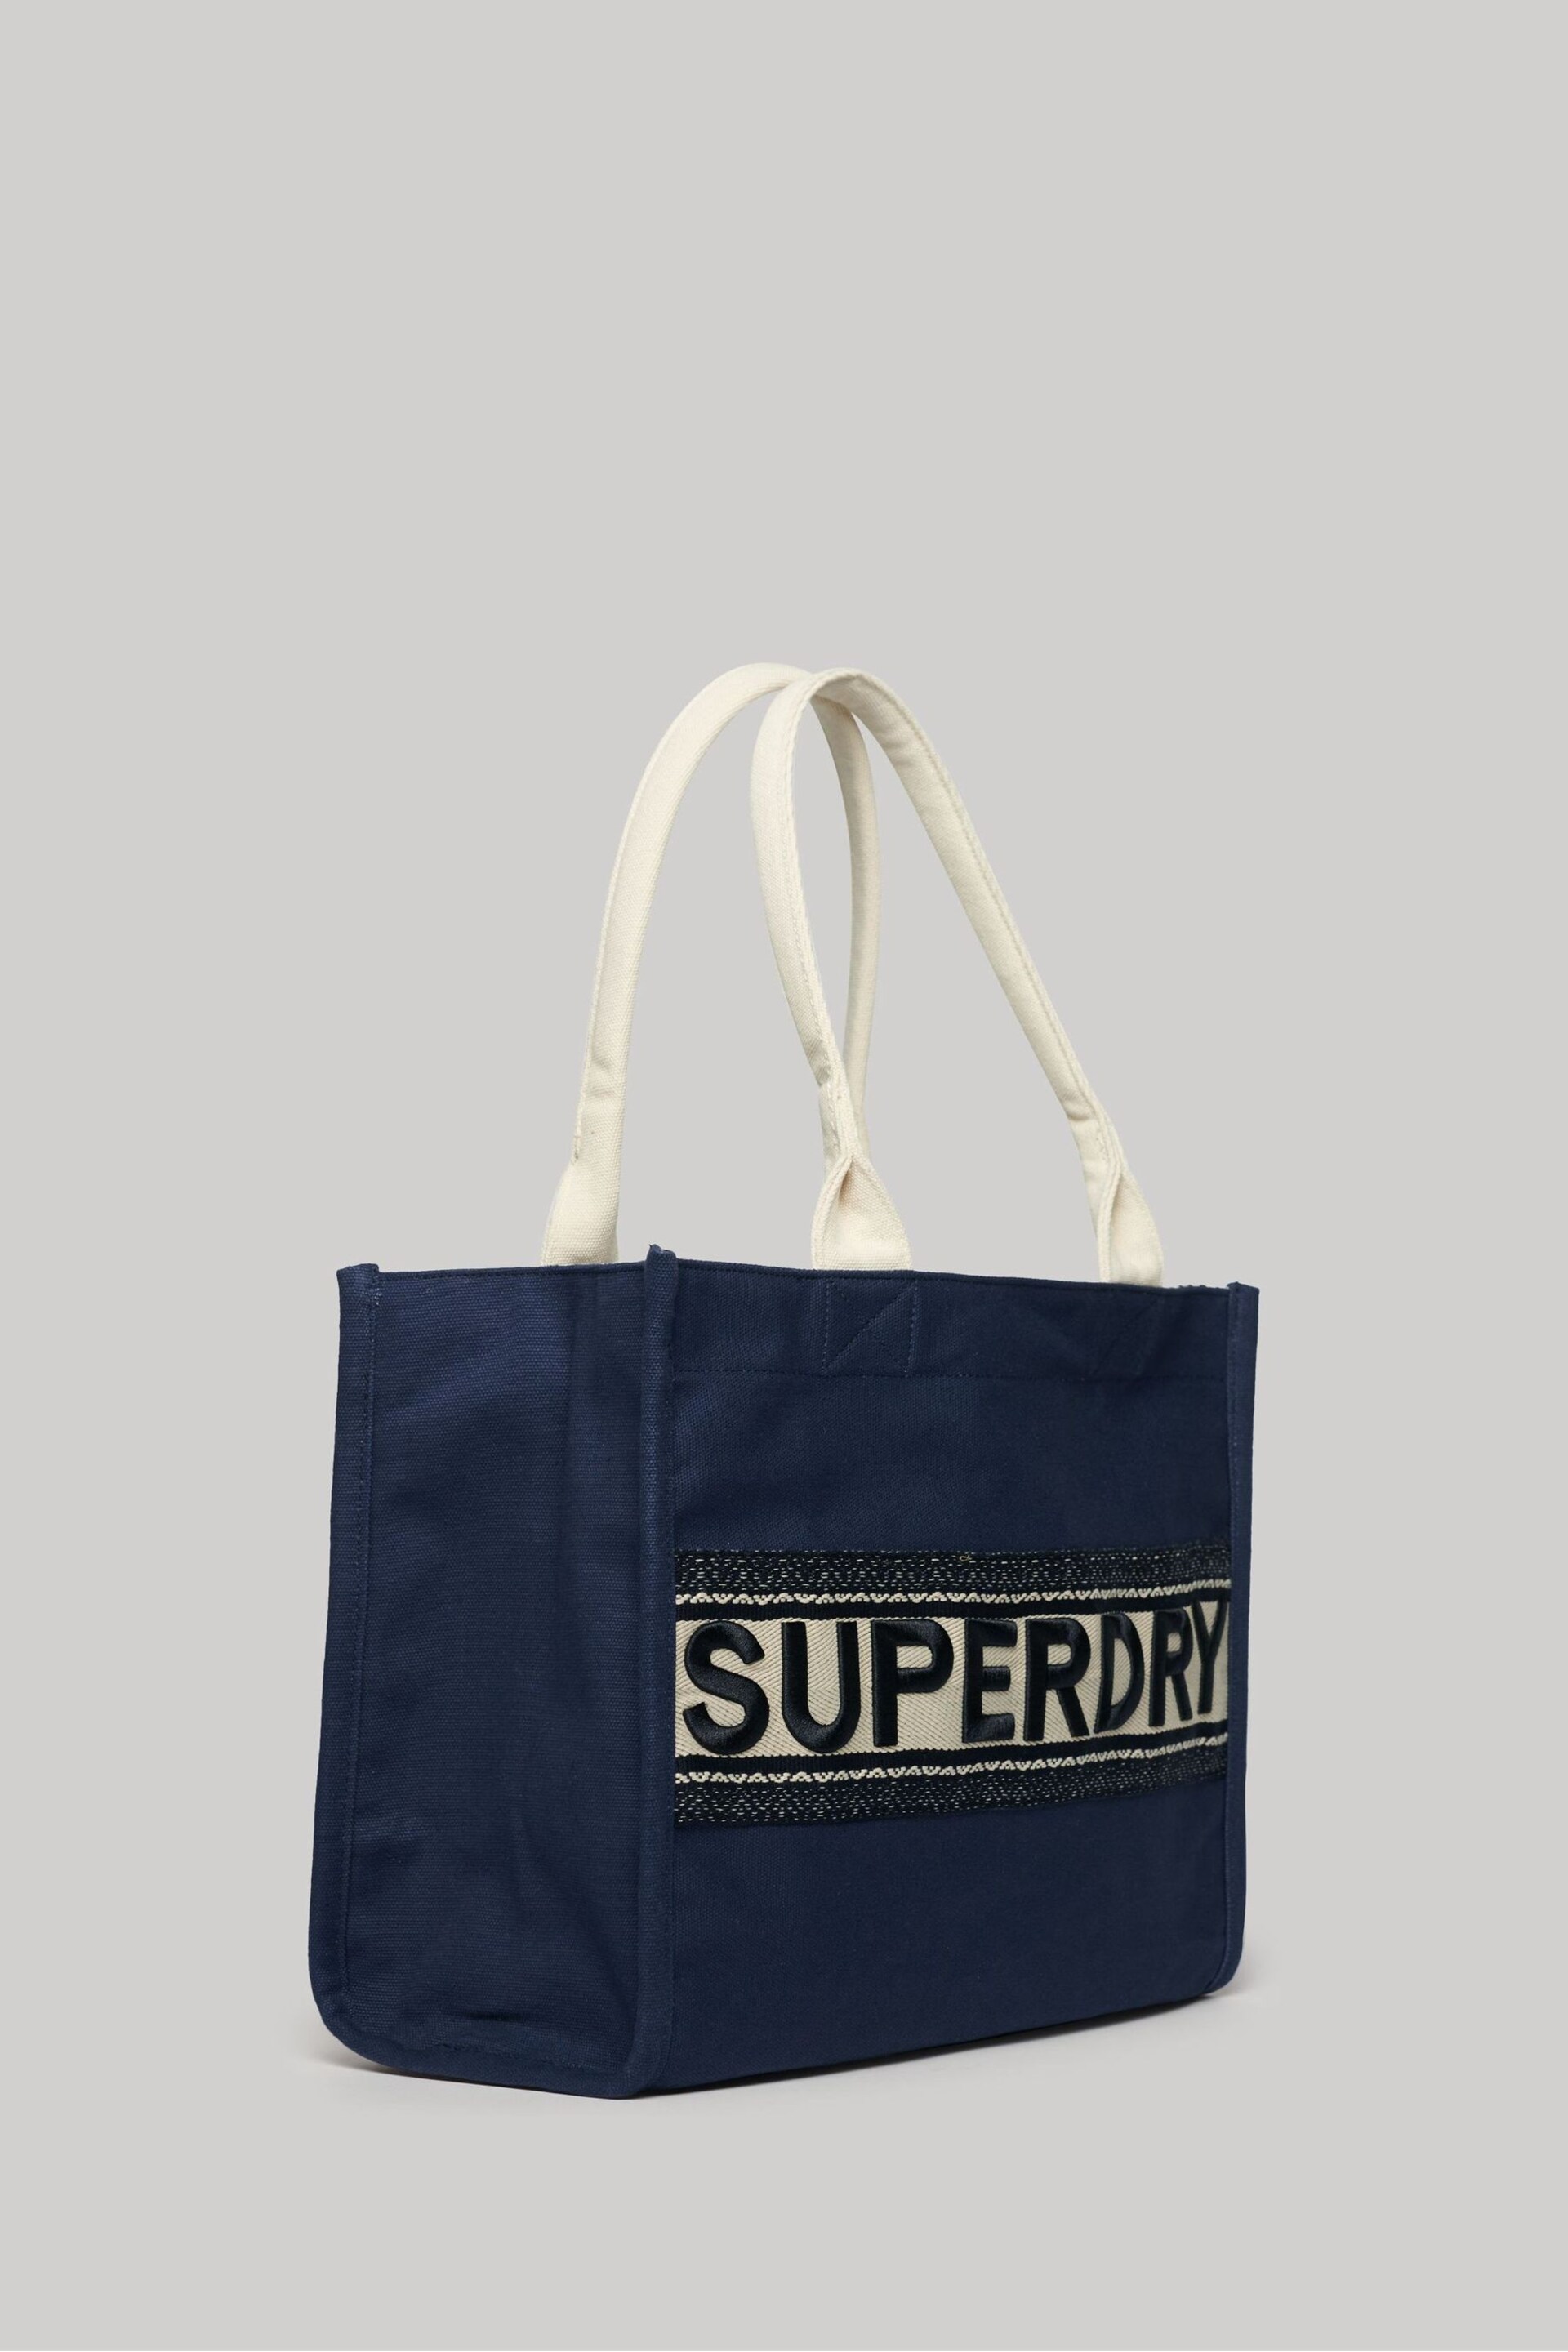 Superdry Blue Luxi Tote Bag - Image 3 of 4